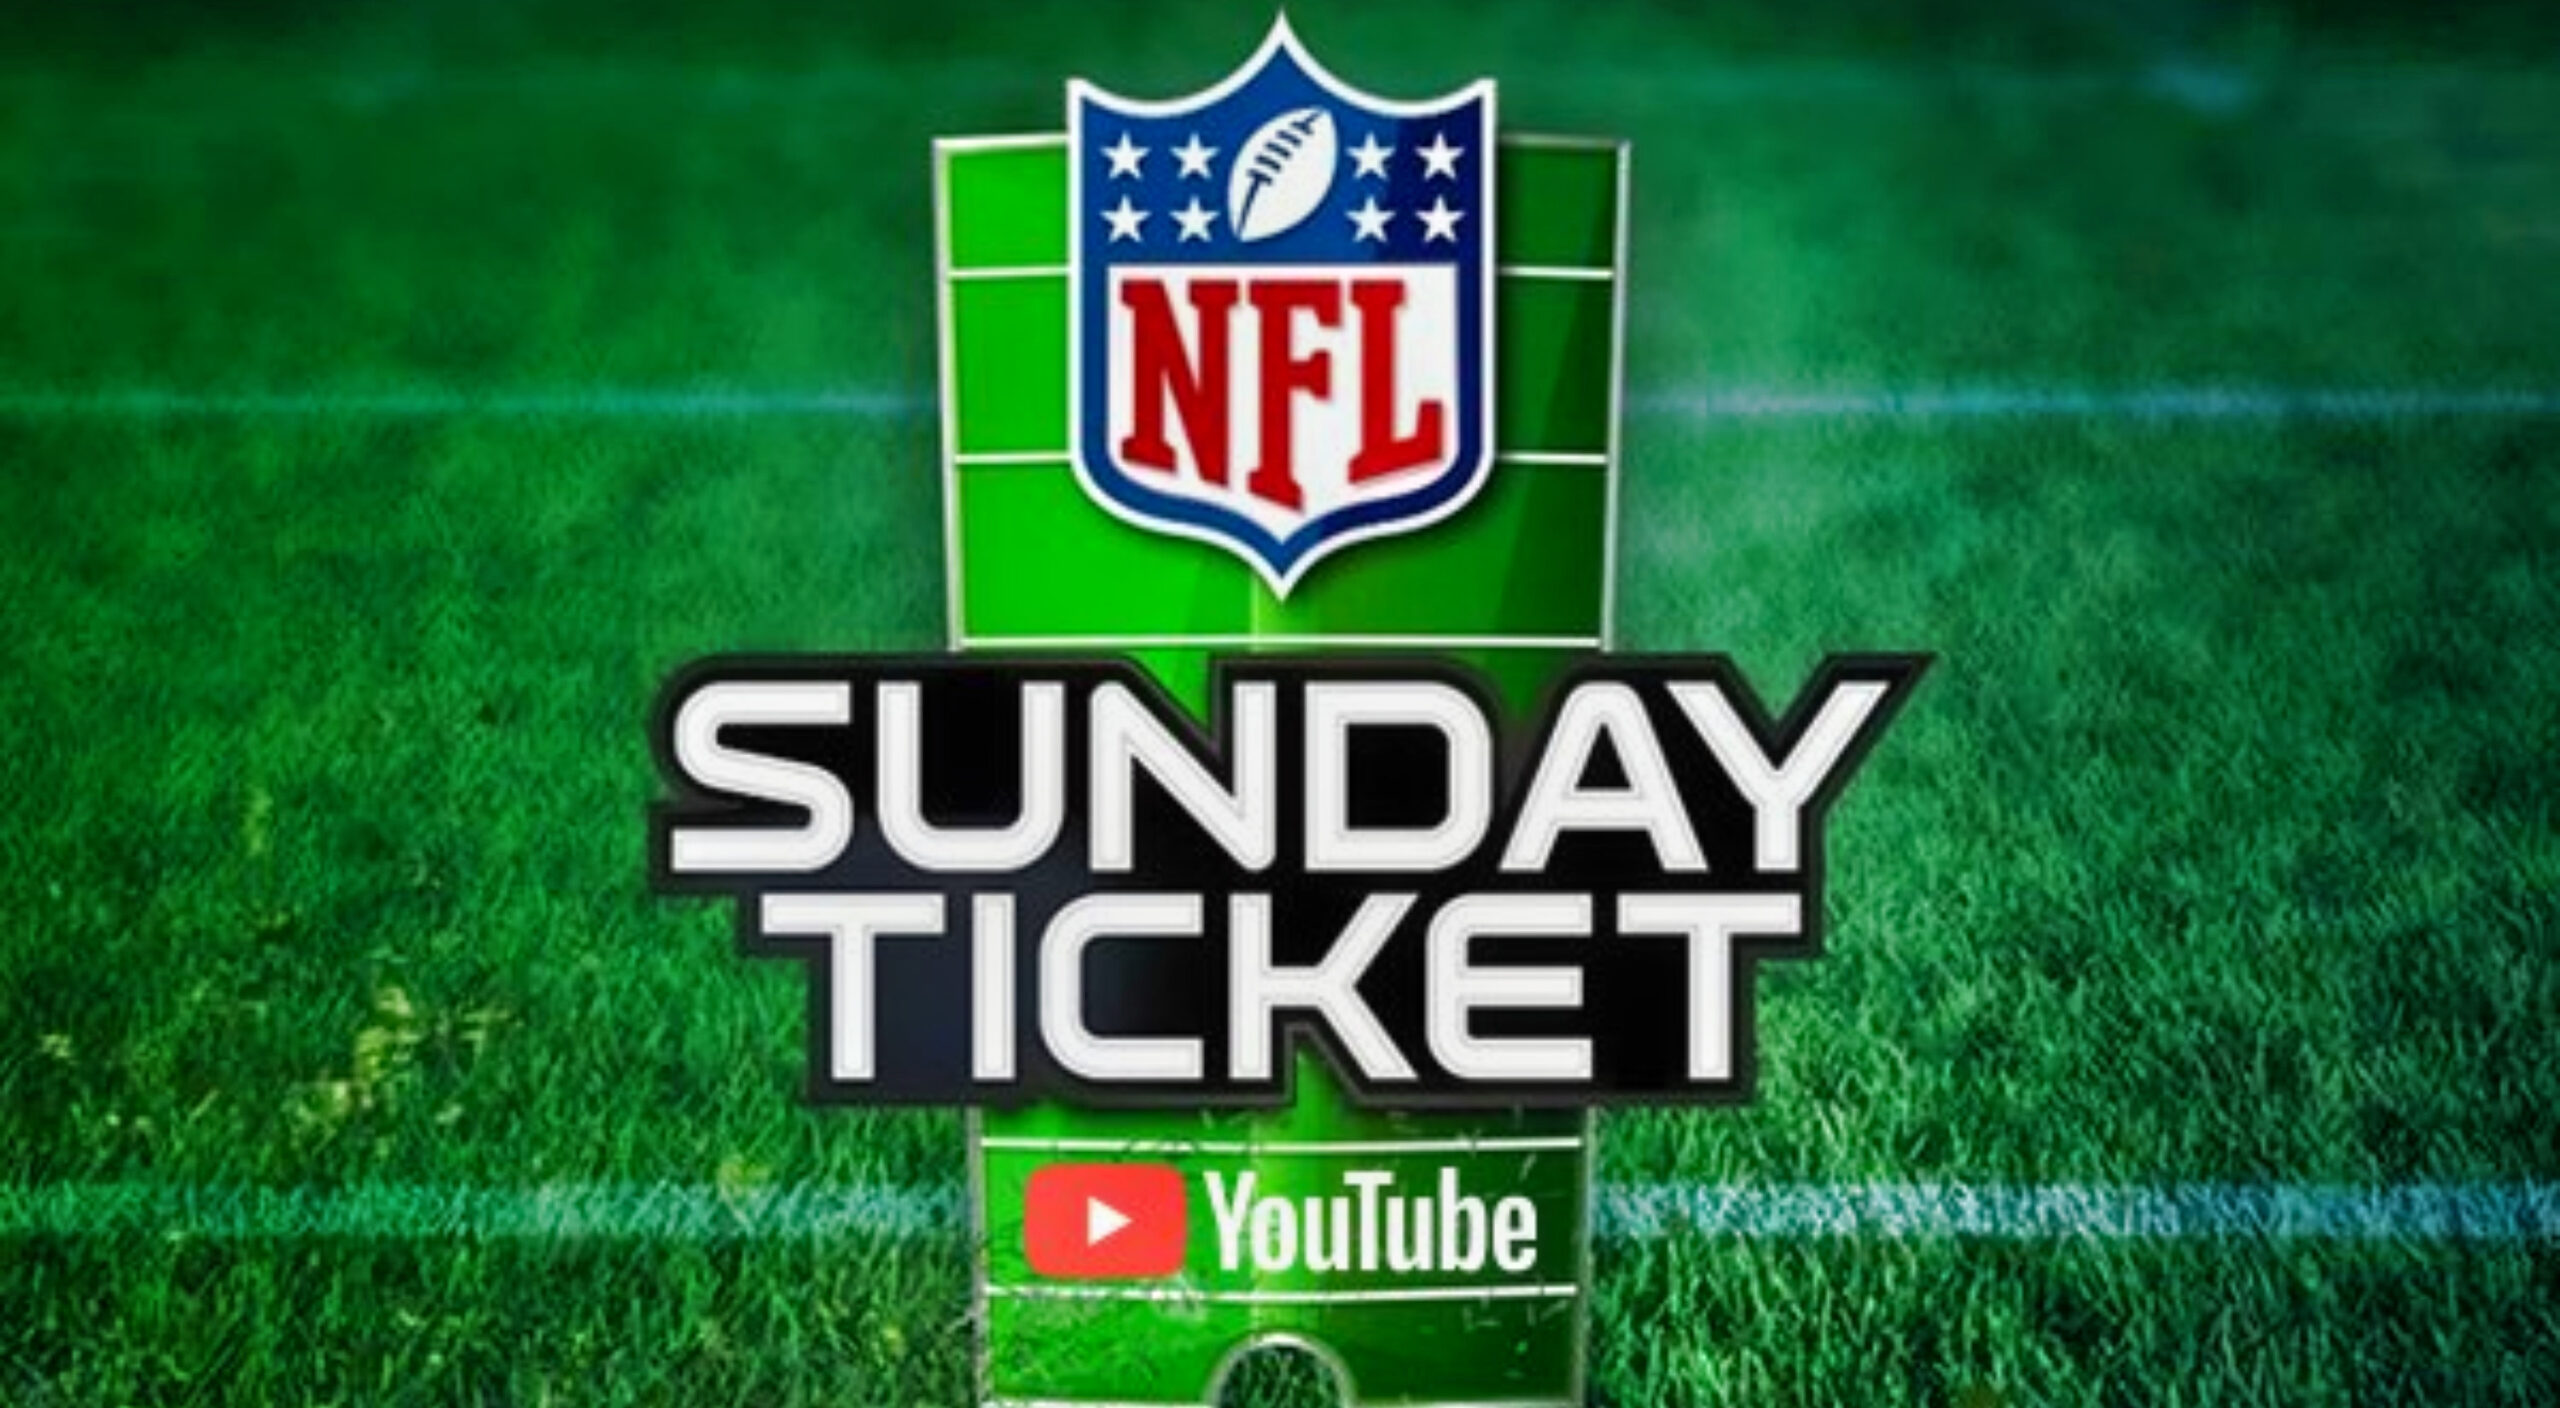 Reveals NFL Sunday Ticket 'Student Plan' Pricing